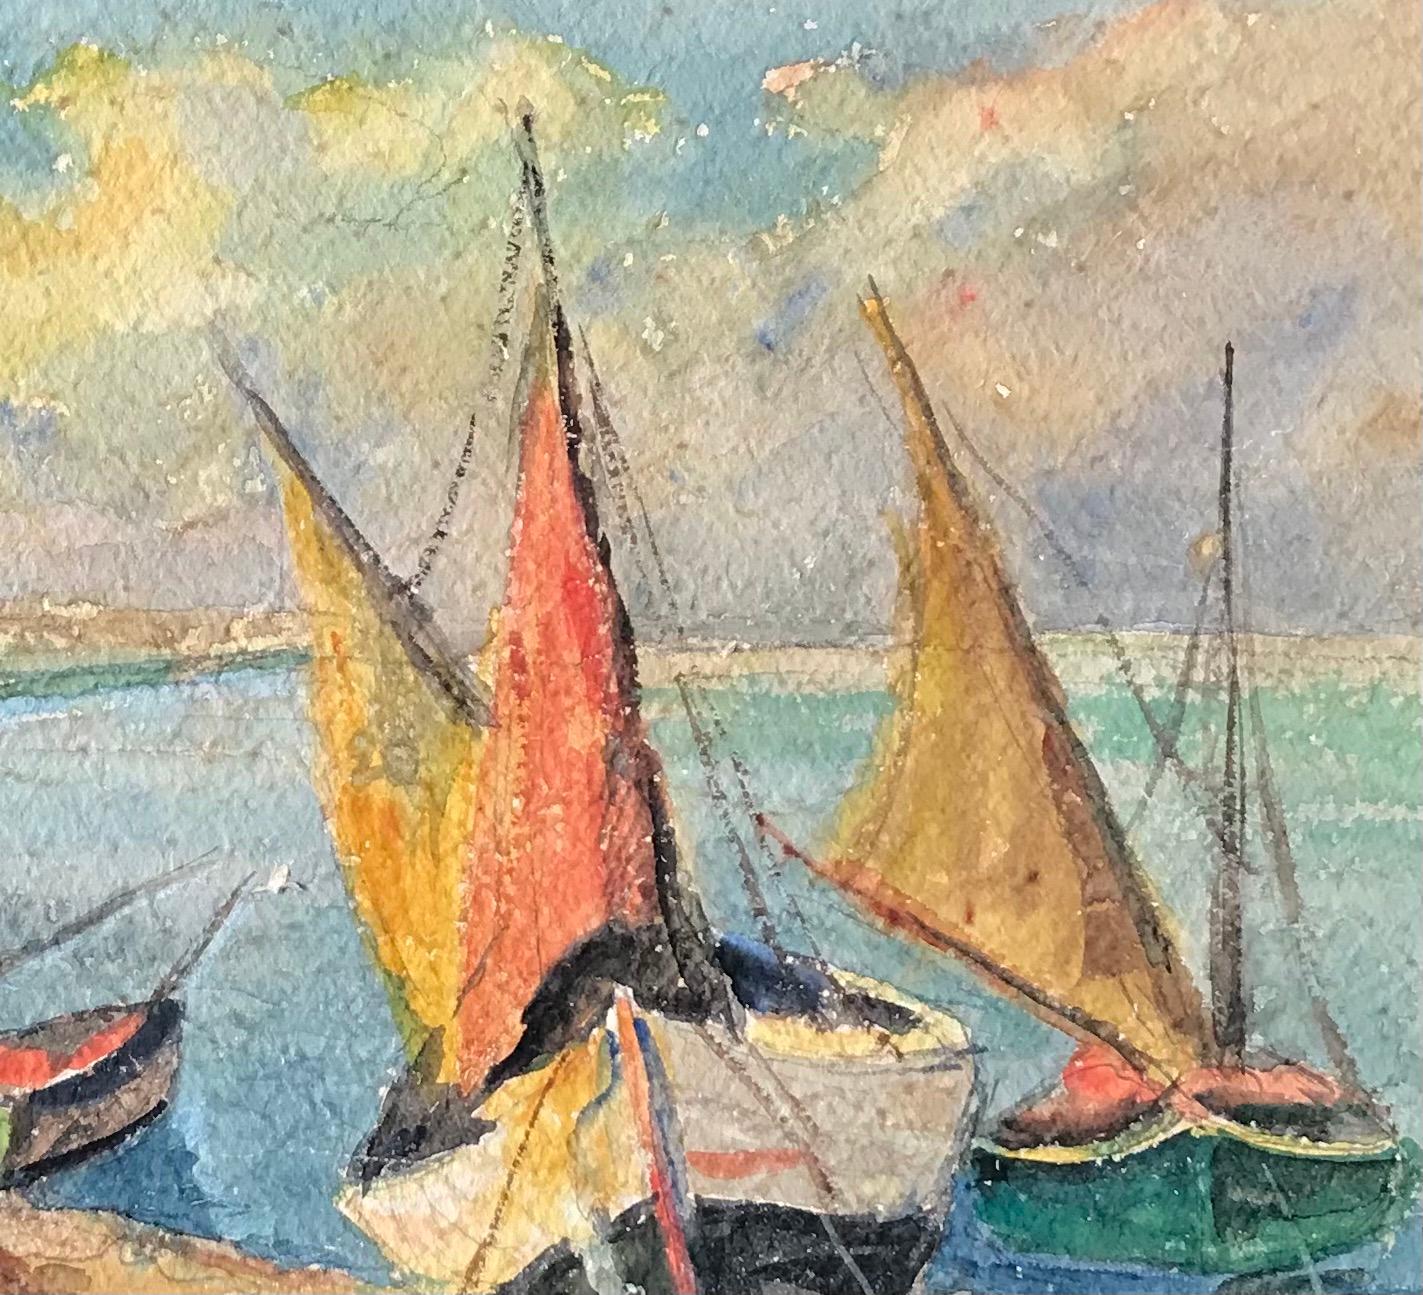 Boats in Rimini, Italy by Harry Urban - Watercolor on paper 35x36 cm For Sale 6